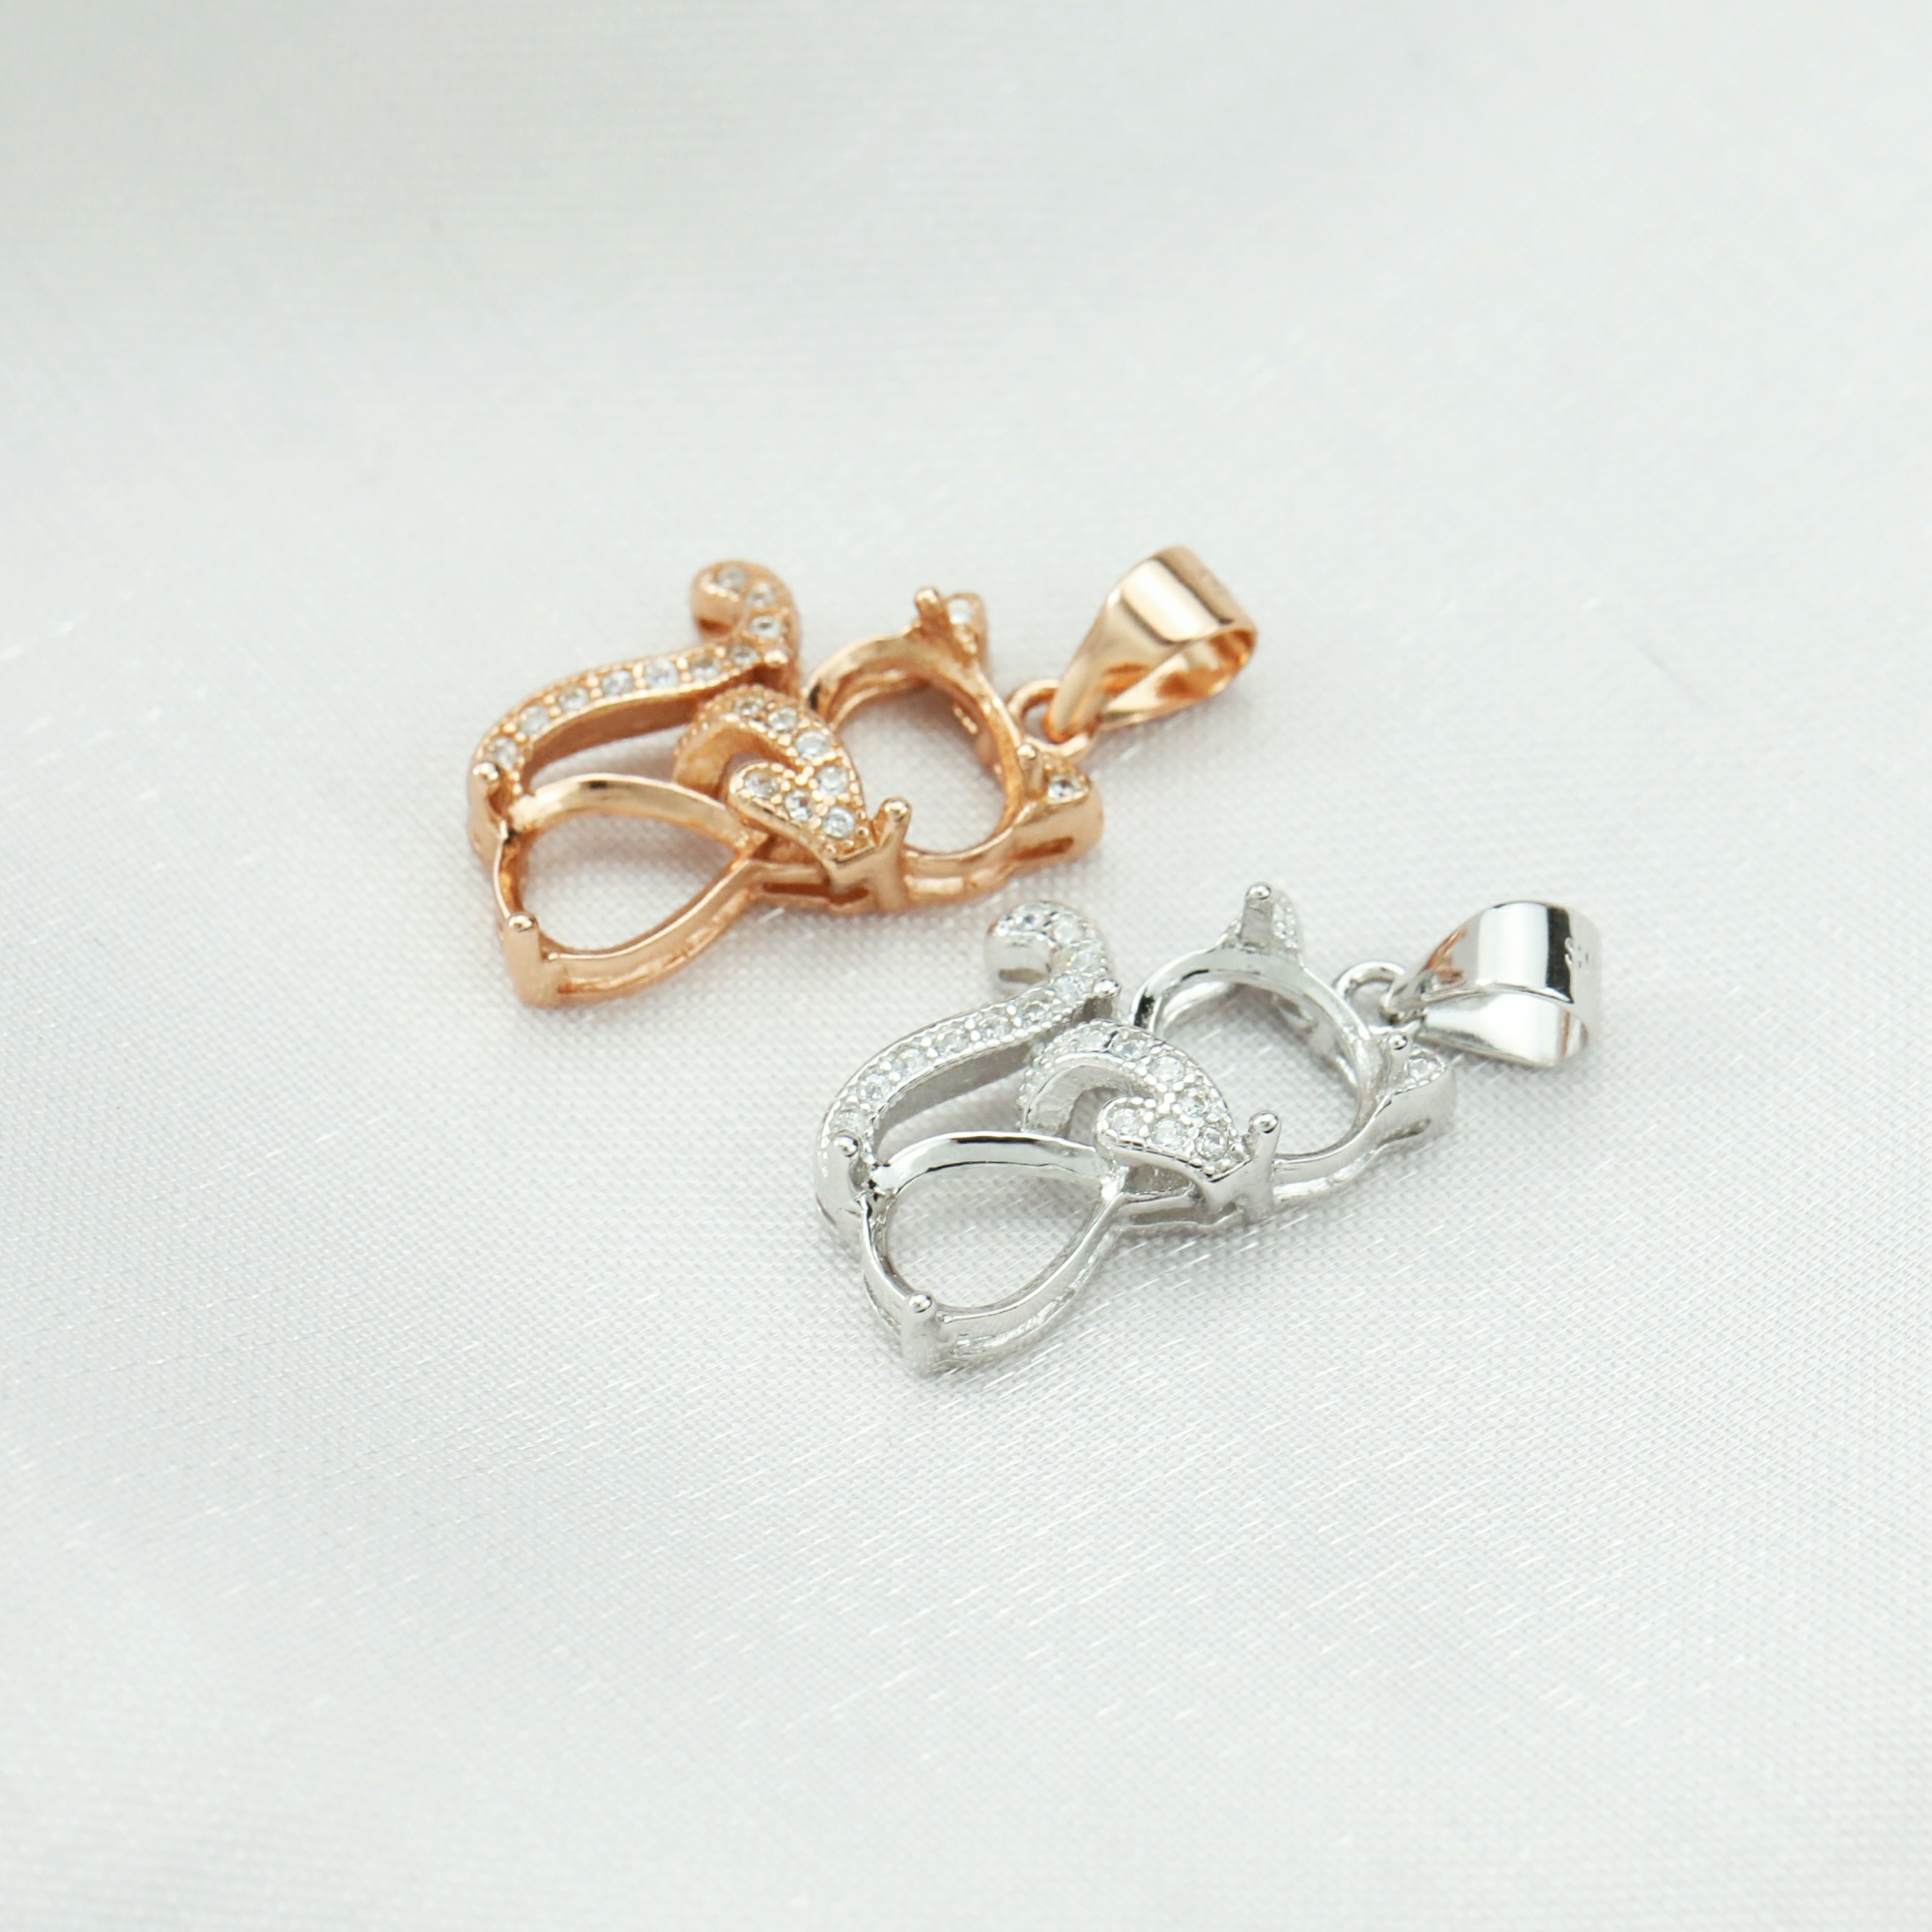 6x8MM Oval Prong Bezel Pendant Settings Rose Gold Plated Solid 925 Sterling Silver Kitty Cat Charm DIY Supplies for Gemstone 1421168 - Click Image to Close